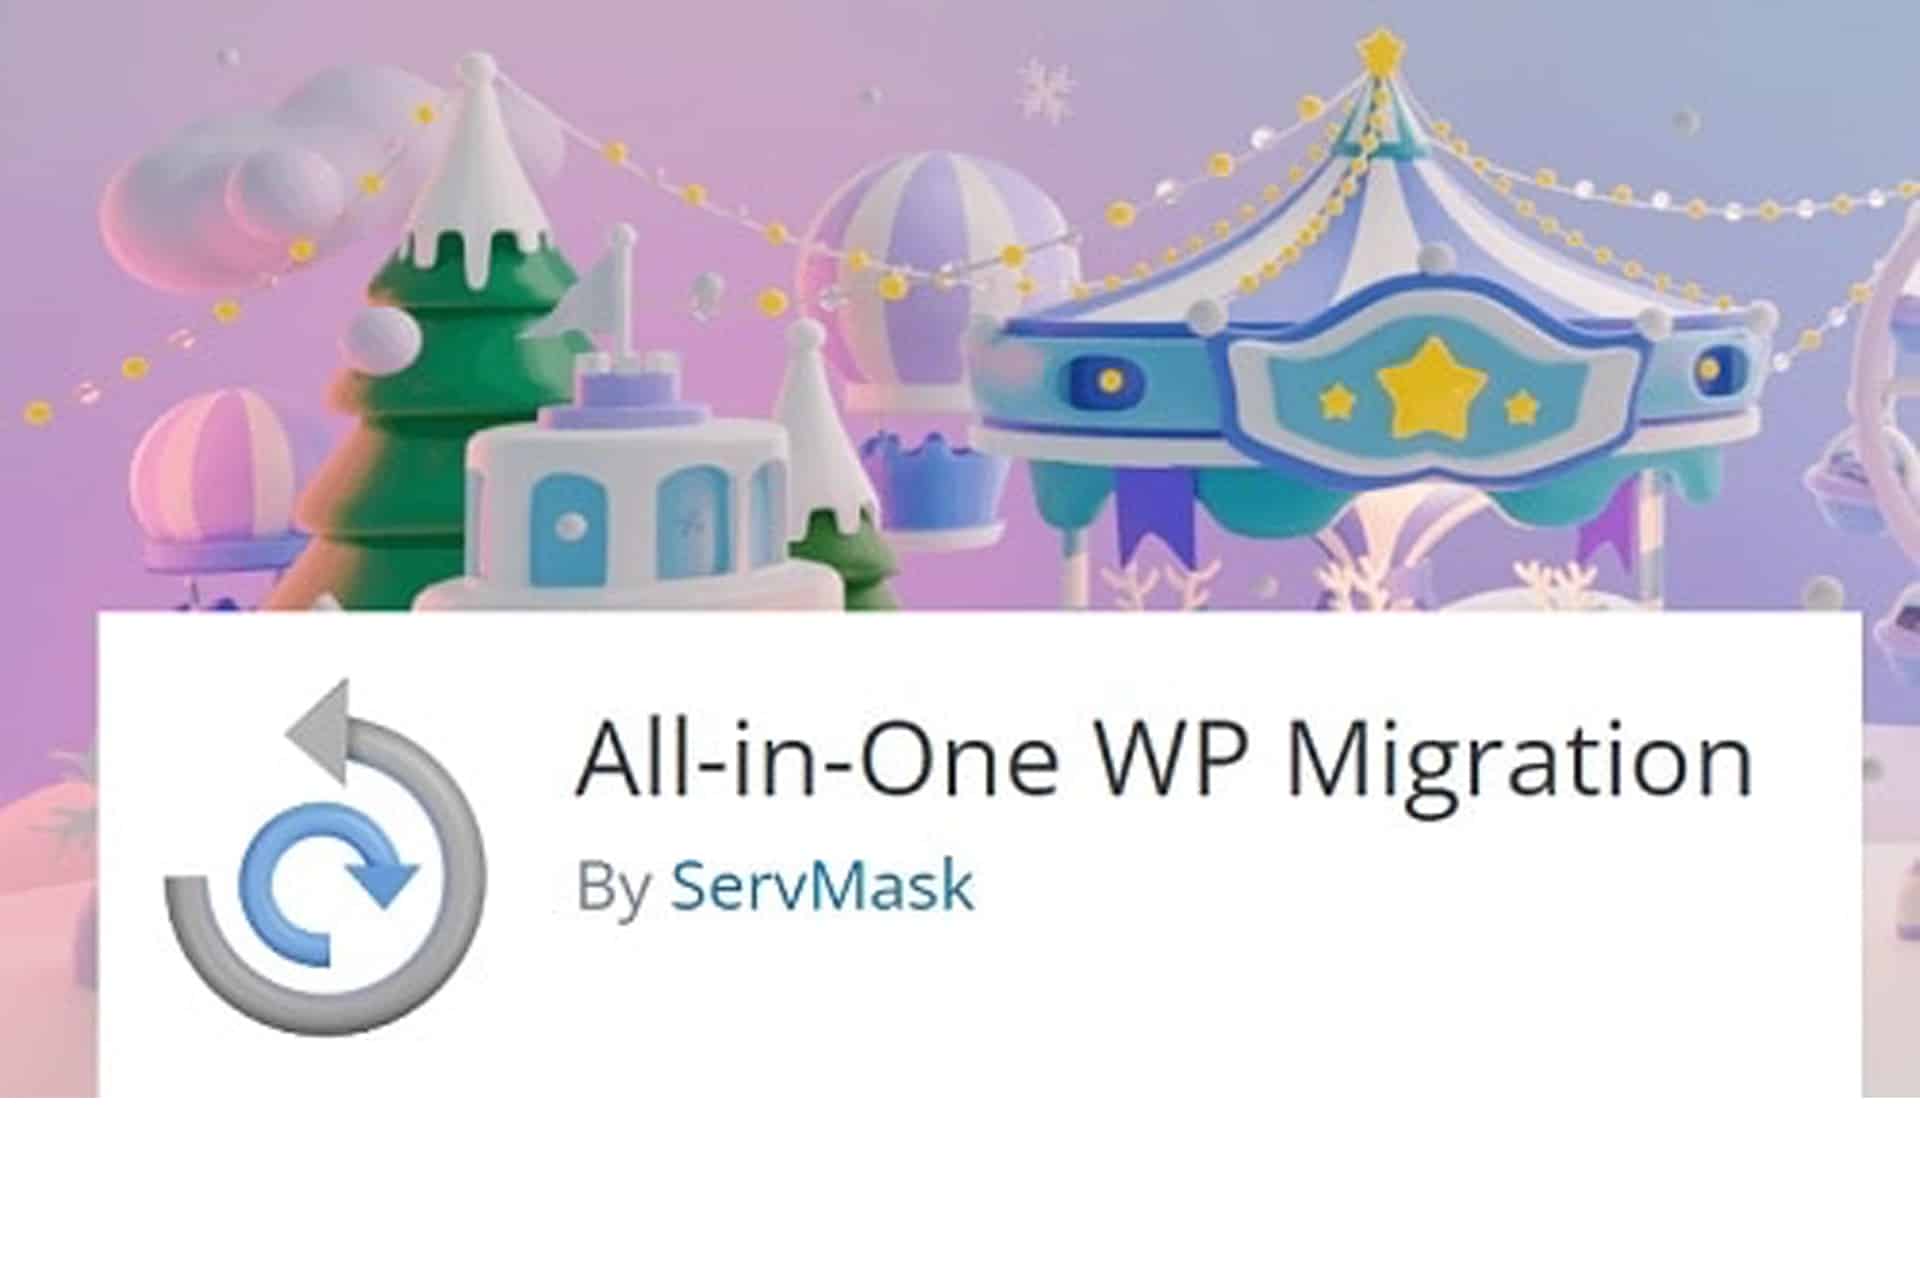 all-on-one wp migration screenshot